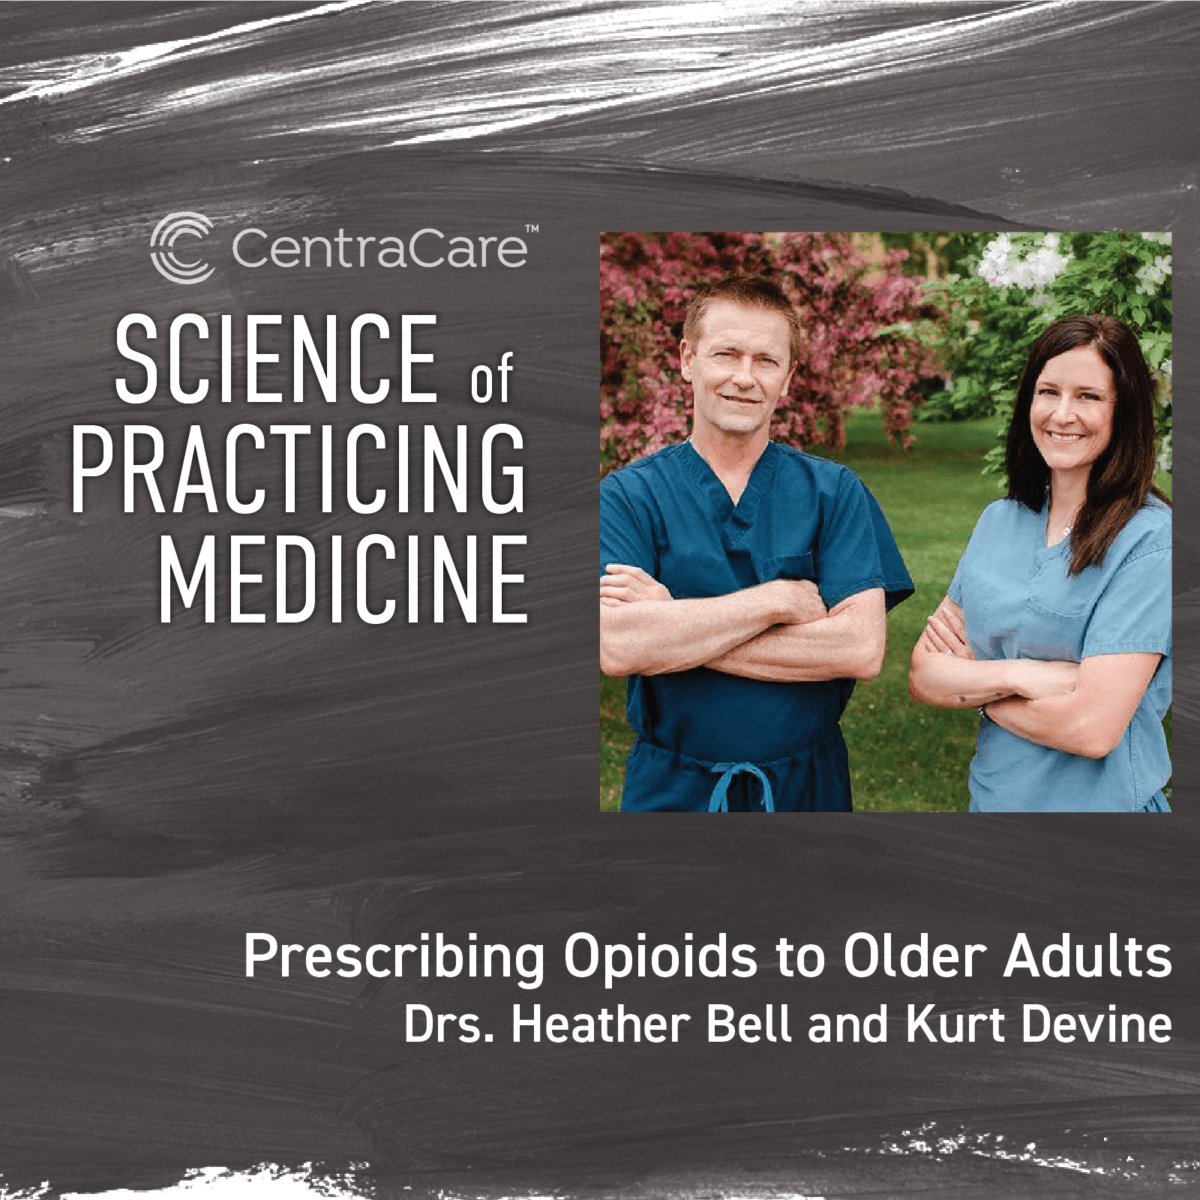 Cover art for the Science of Practicing Medicine CME on Prescribing Opioids to Older Adults